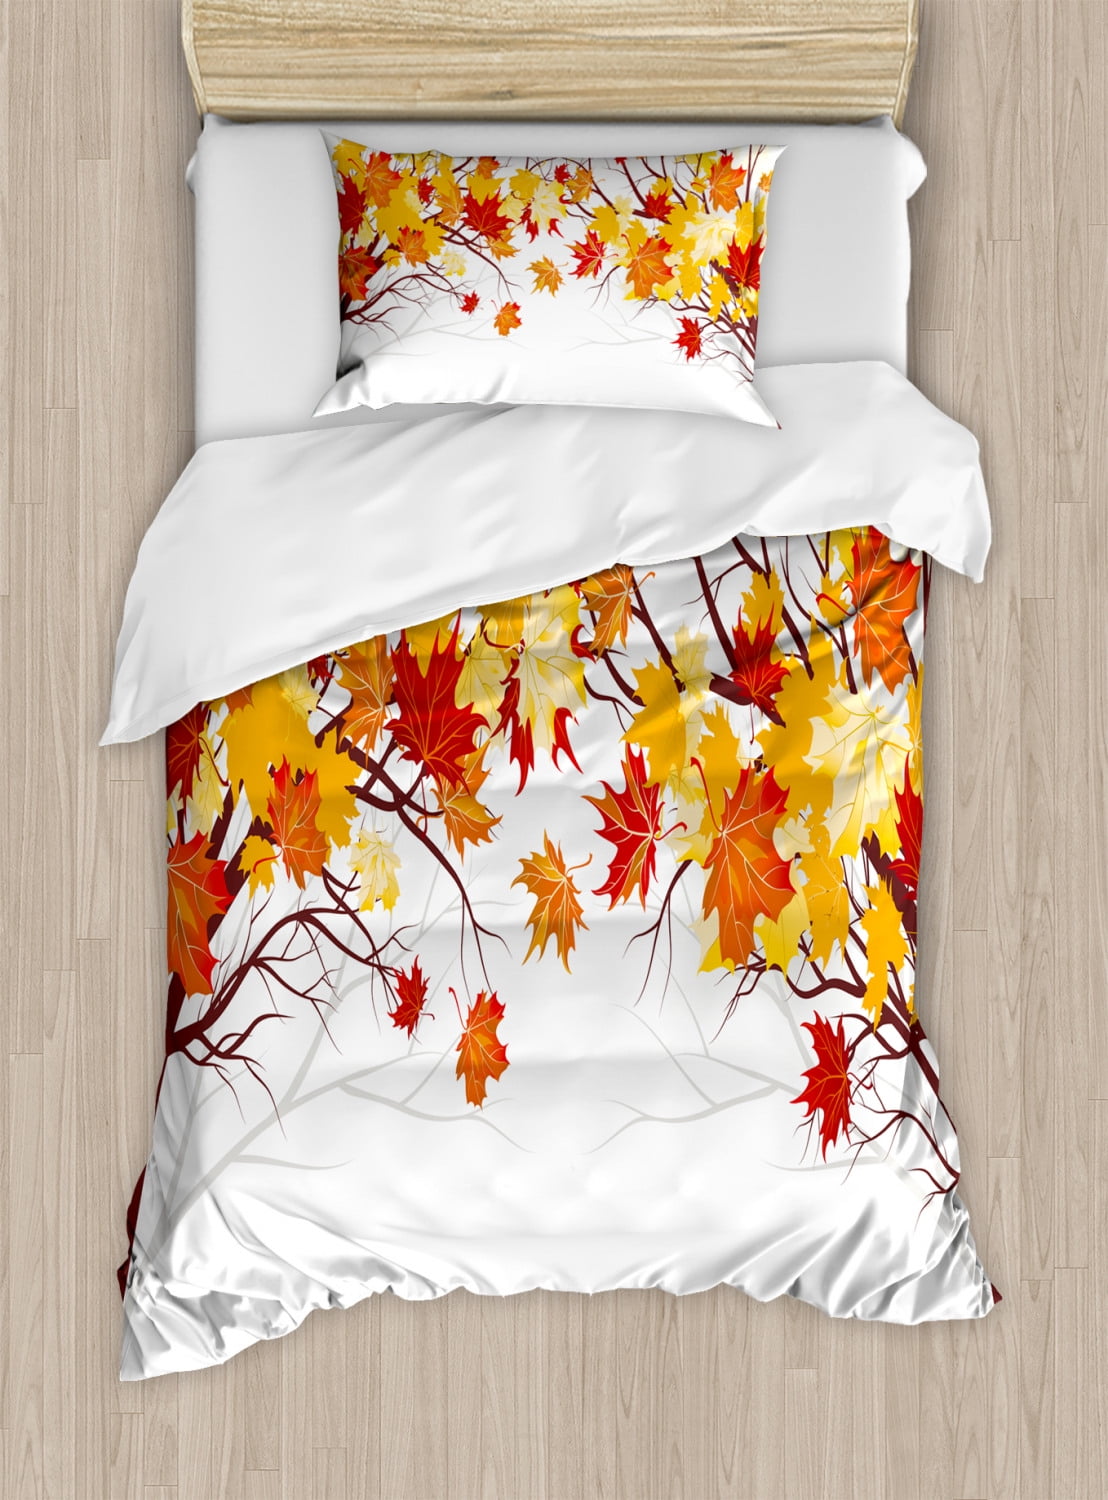 Reversible Down Alternative Comforter Thanksgiving Maple Leaf Pattern Lightweight Bedspread Thin Soft Throw Blankets Bed Quilt for All Seasons Autumn Harvest